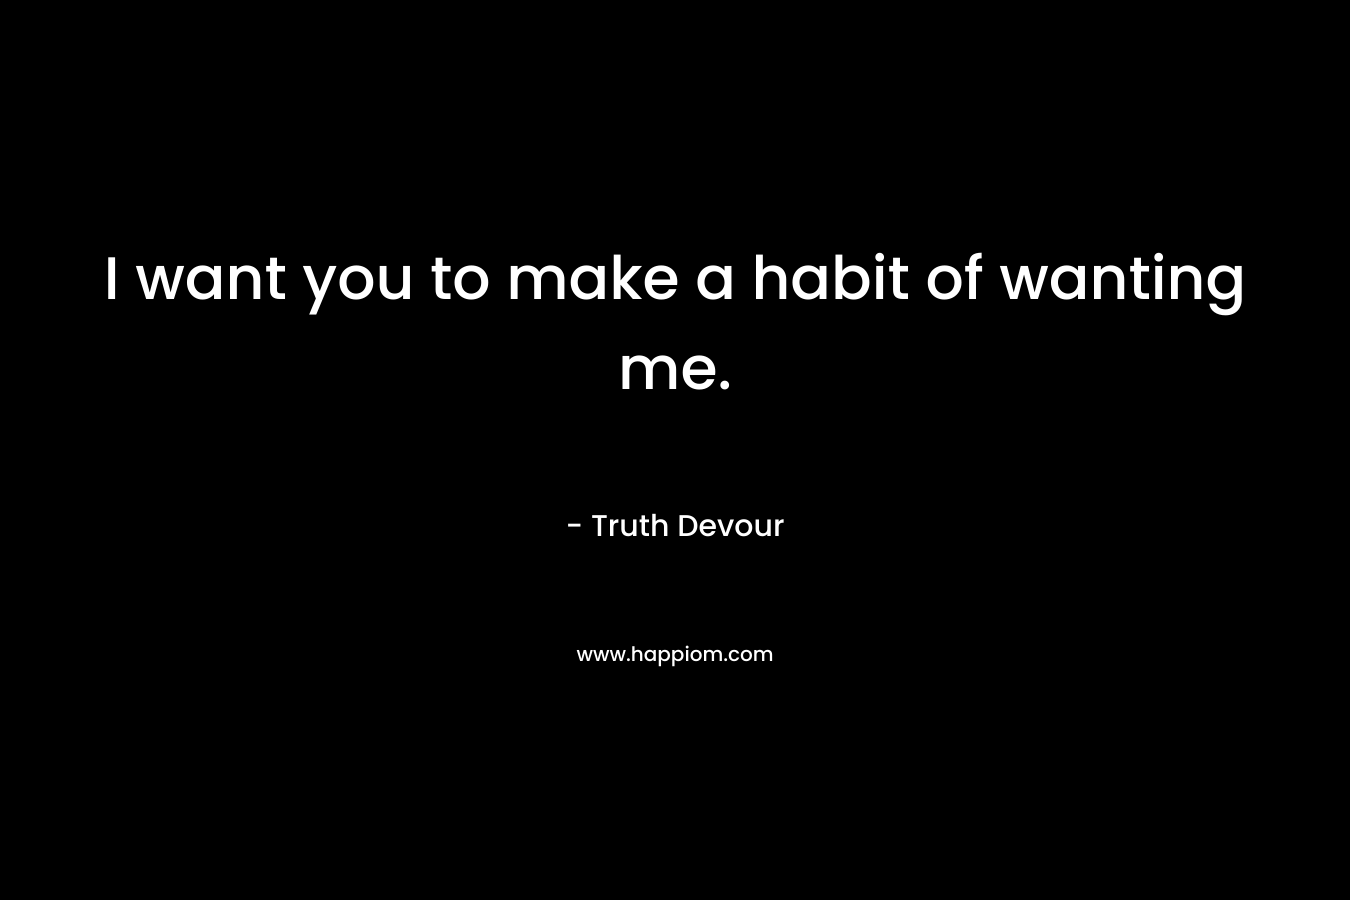 I want you to make a habit of wanting me. – Truth Devour